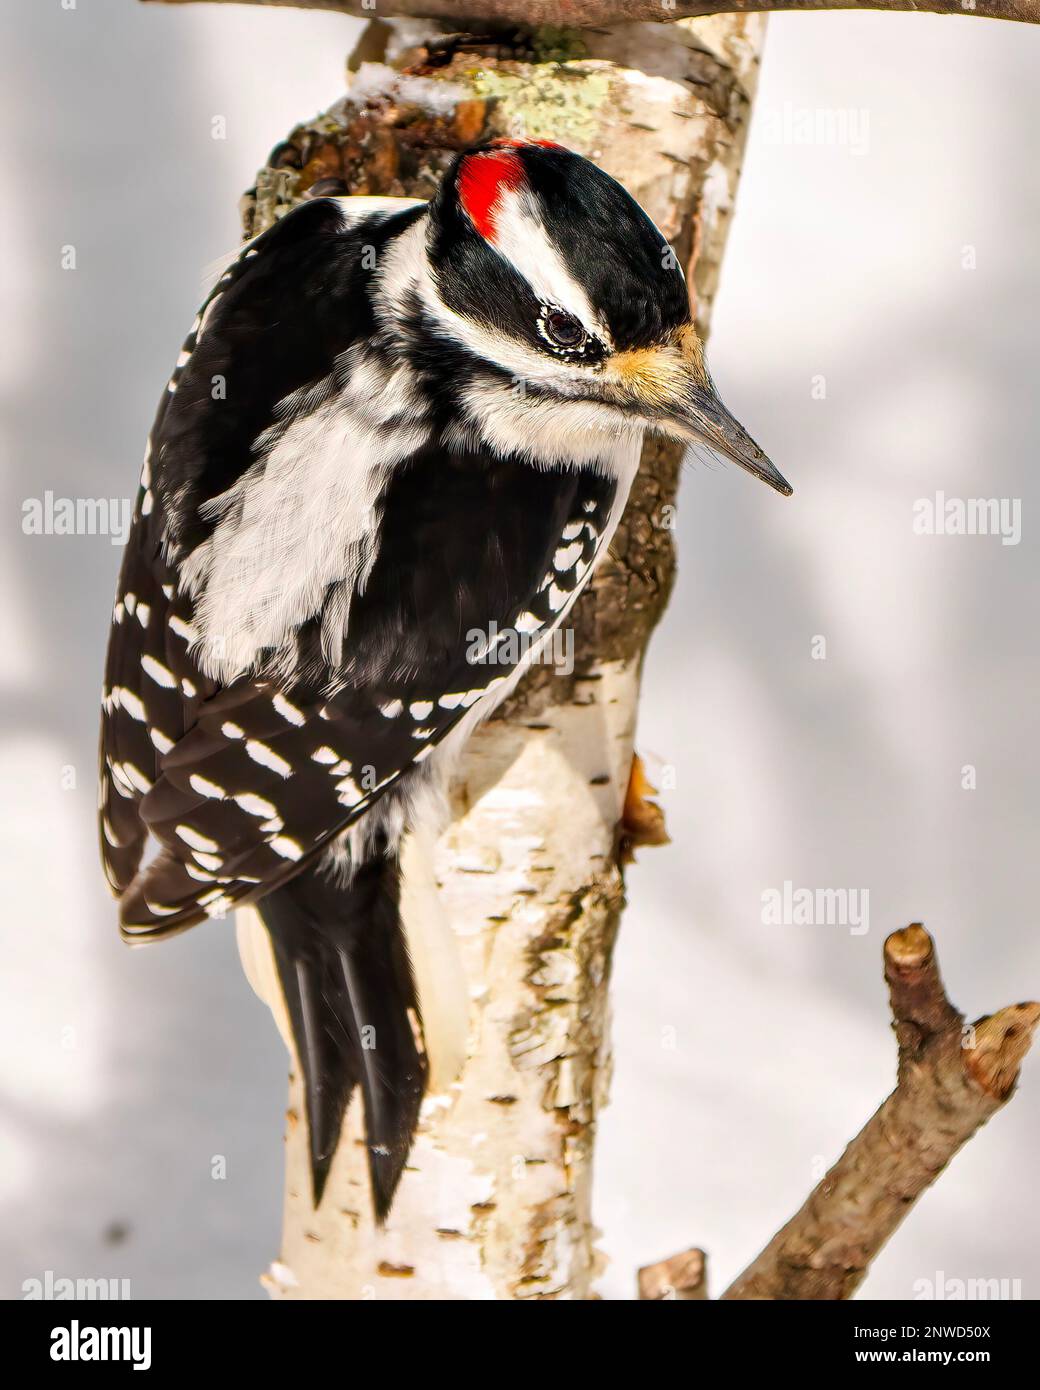 Woodpecker close-up profile view male clinging to  a birch tree branch with a white background in its environment and habitat surrounding. Stock Photo